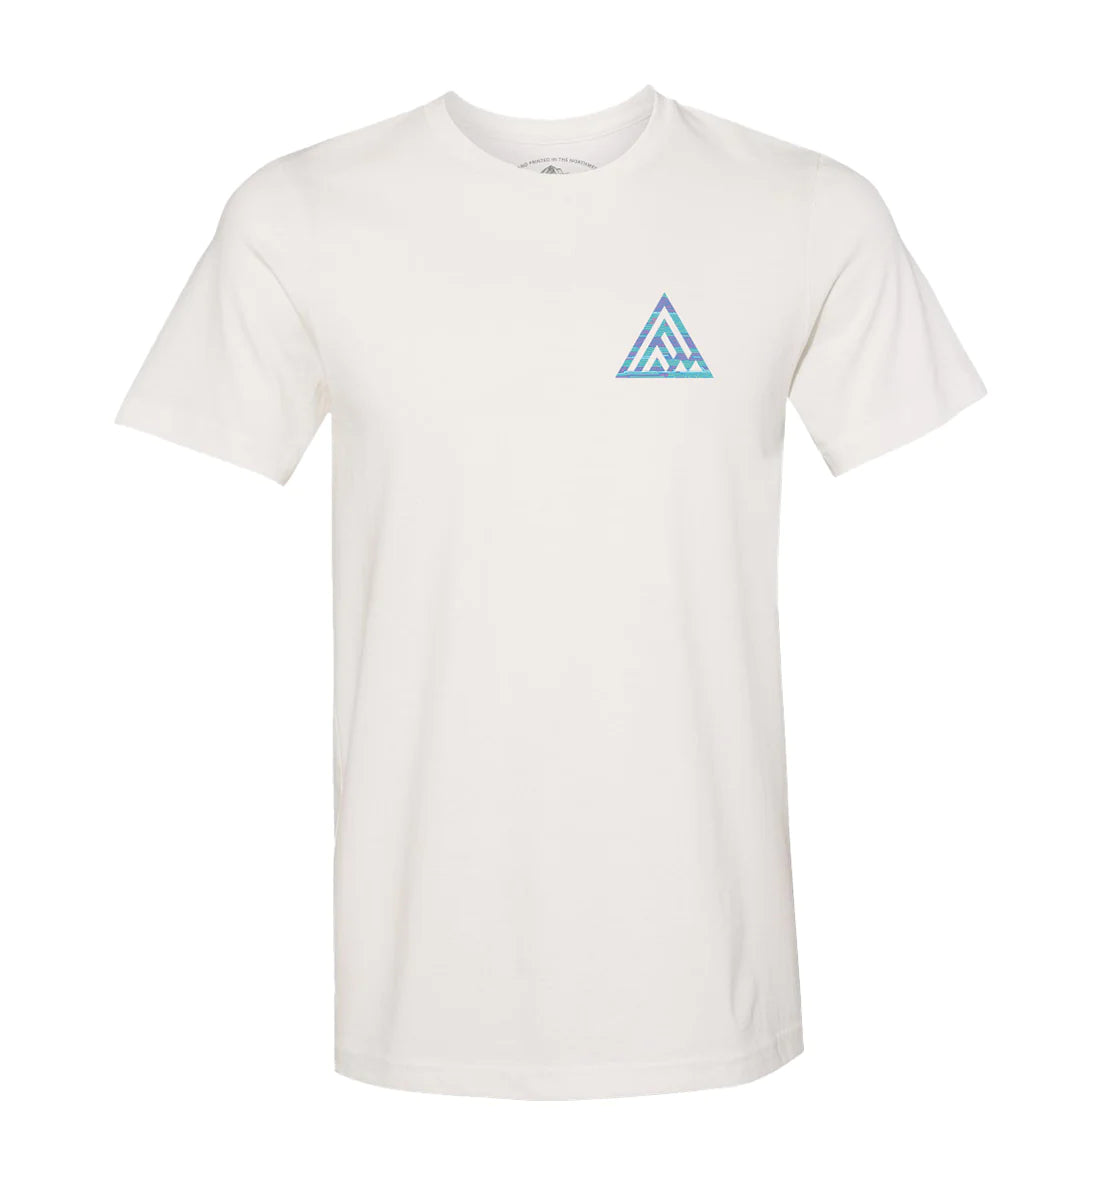 The Great PNW Channel Tee - White